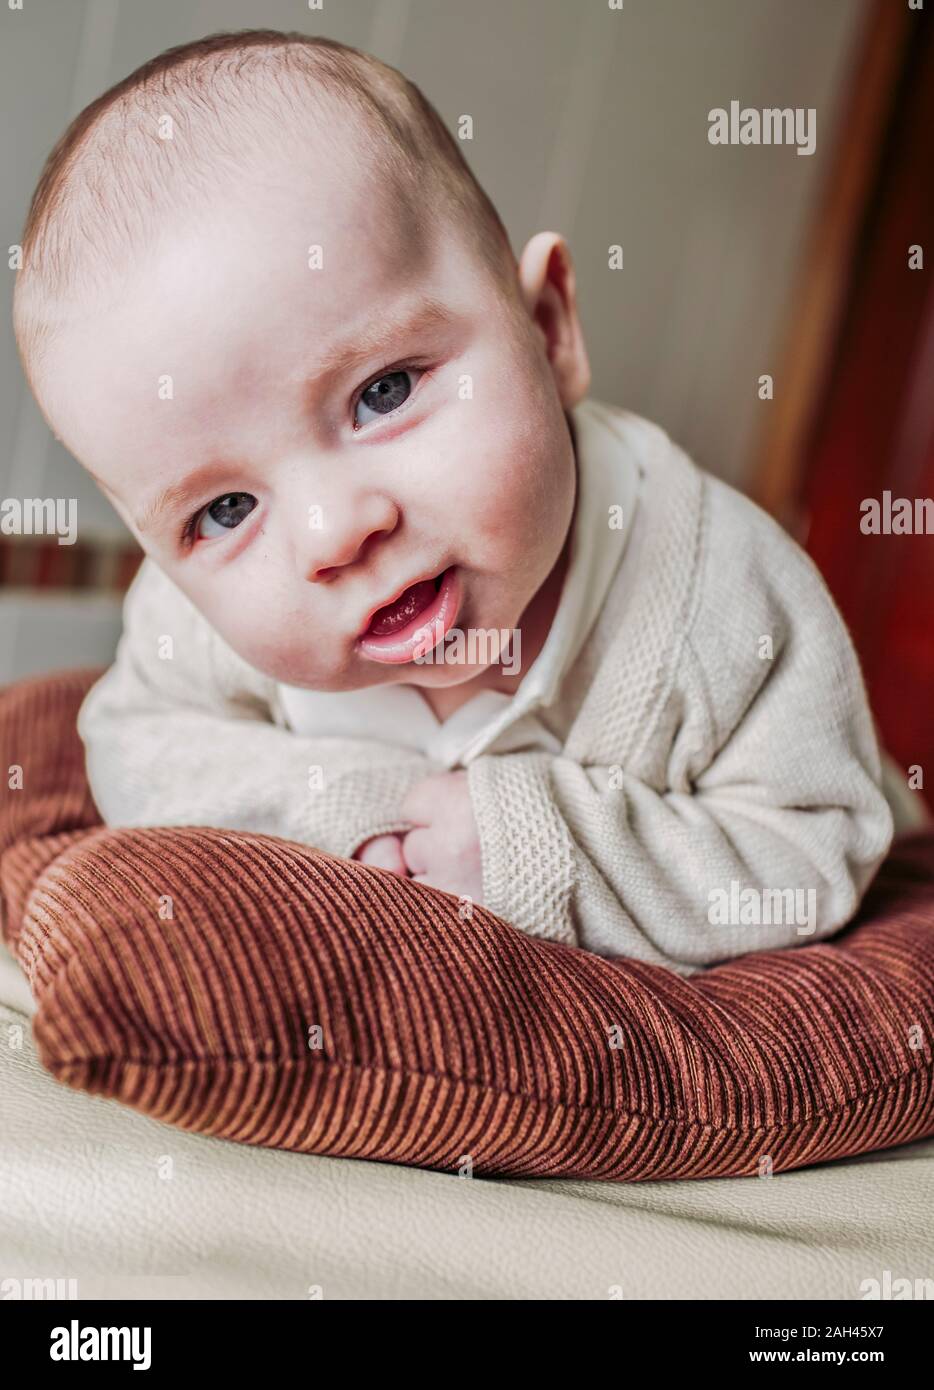 Portrait of baby boy lying on a bed Stock Photo